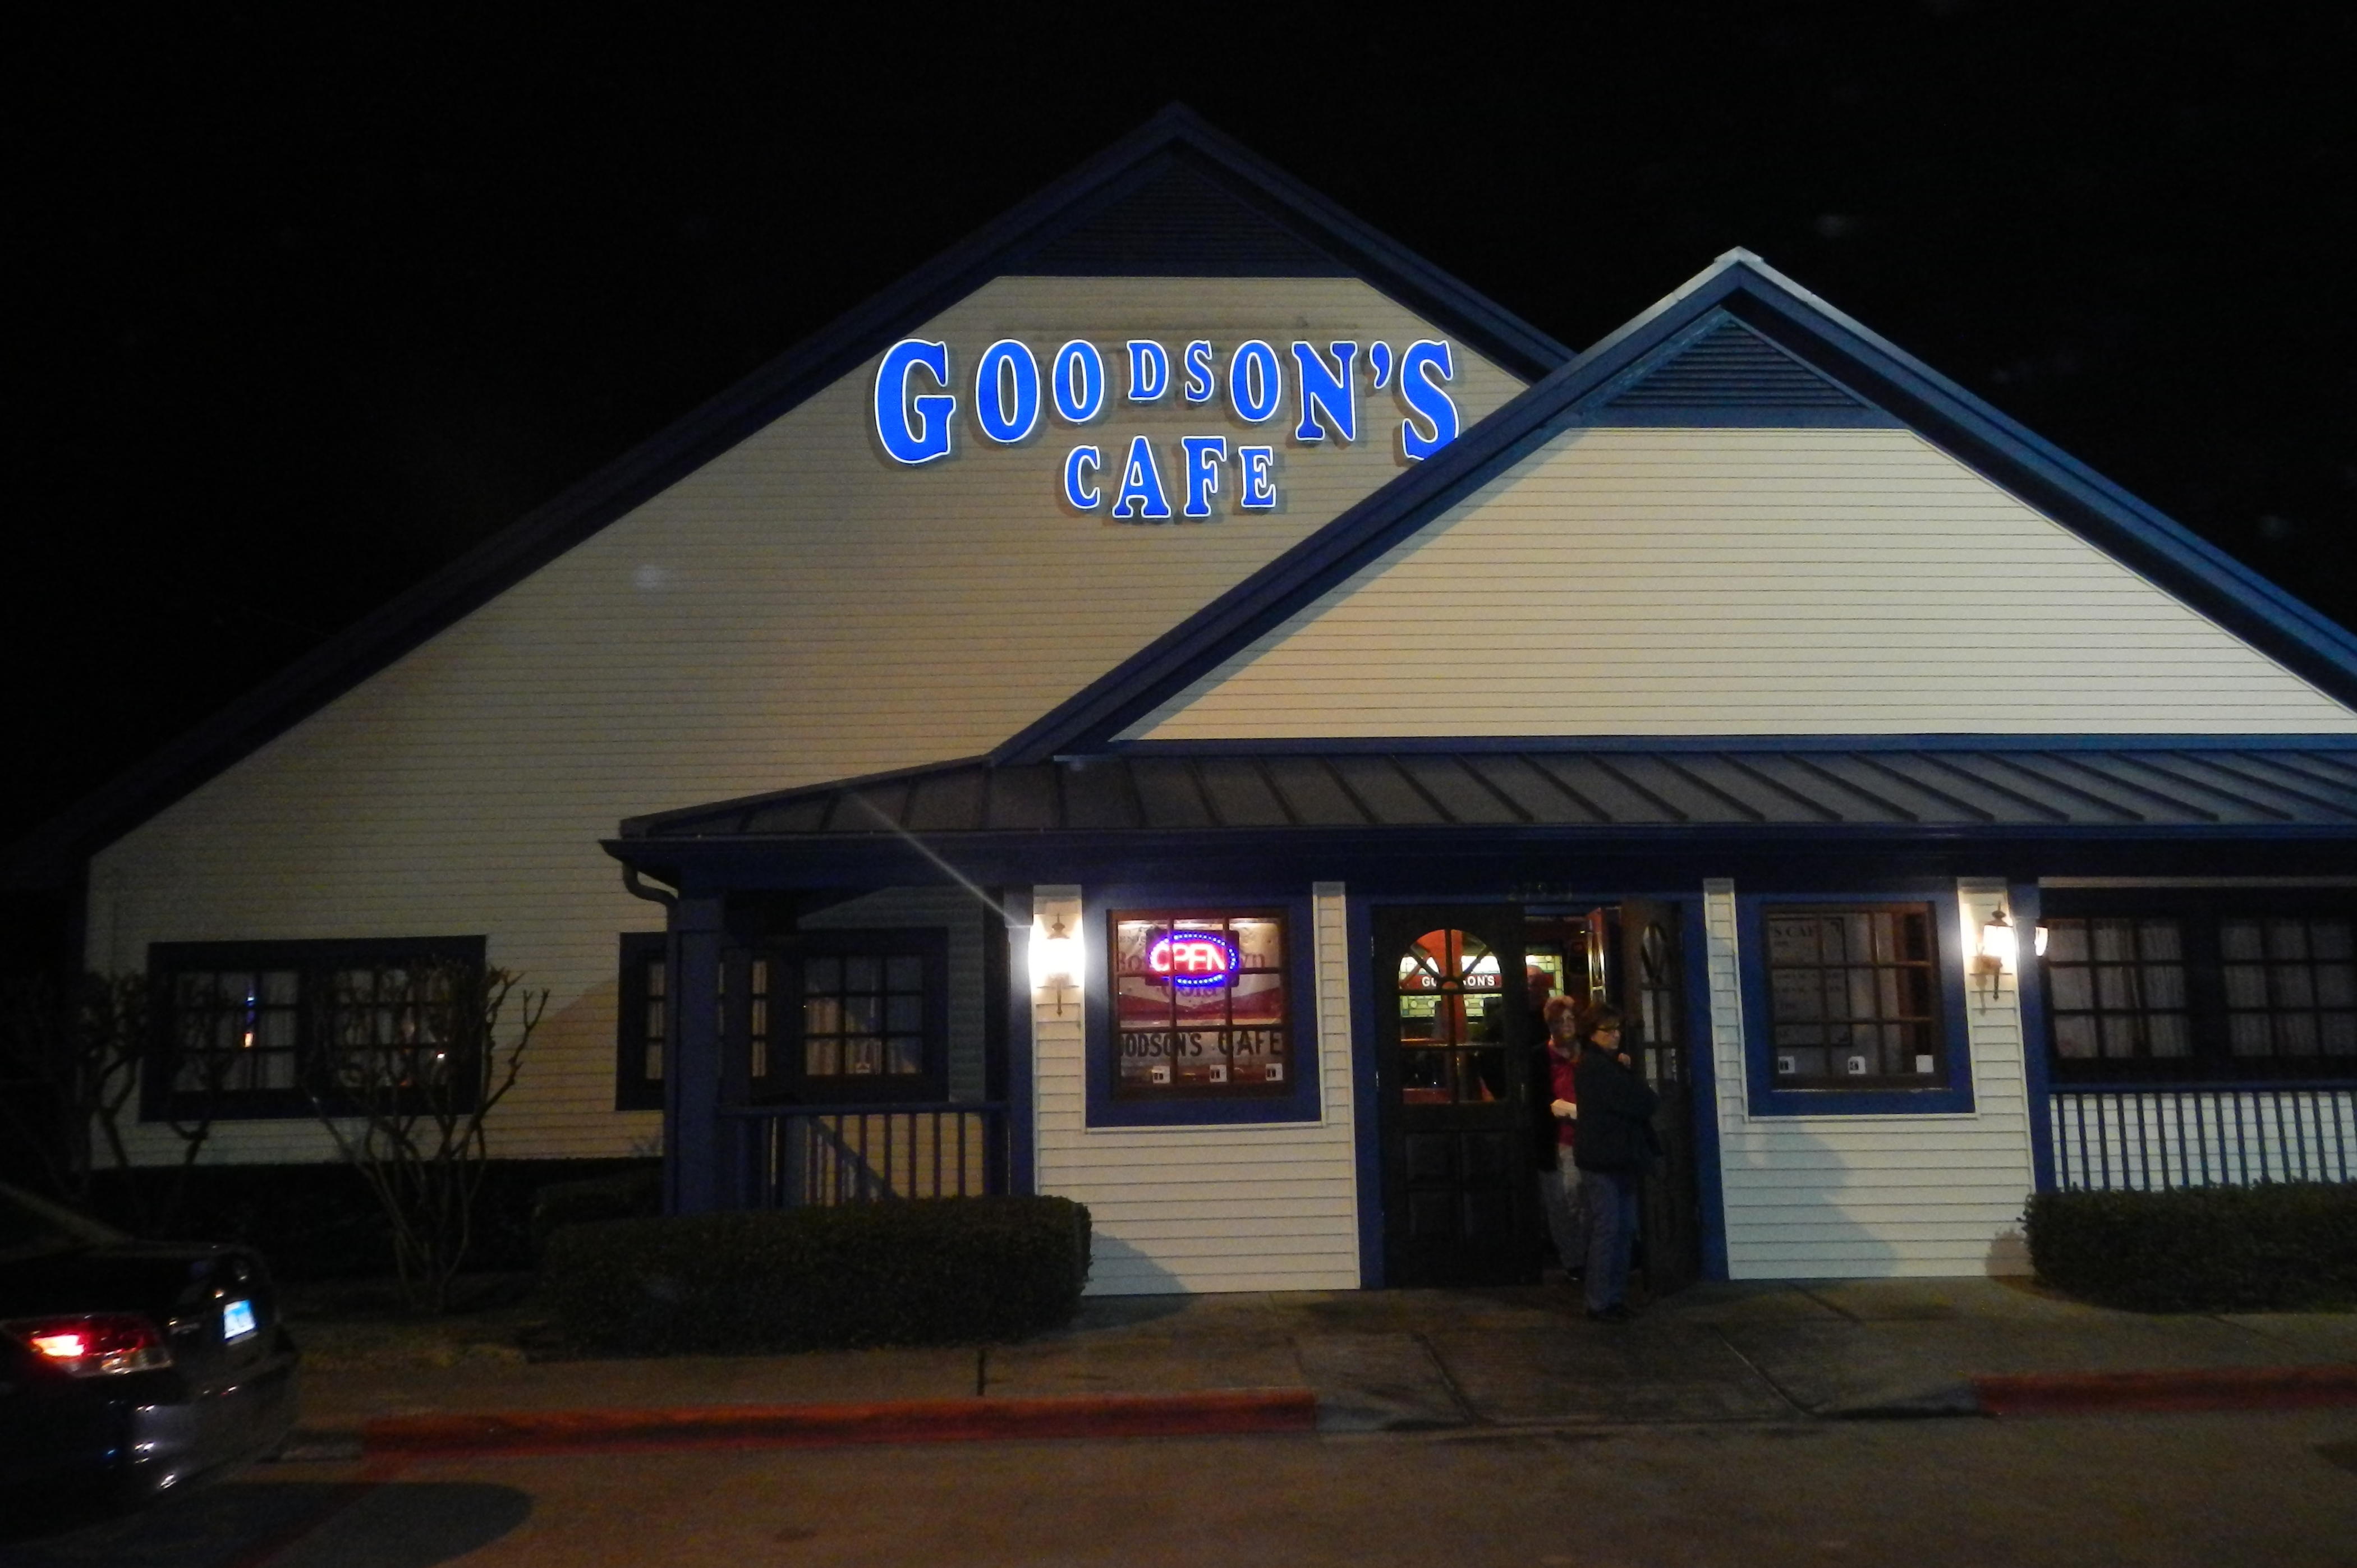 Goodson's Cafe in Tomball, TX